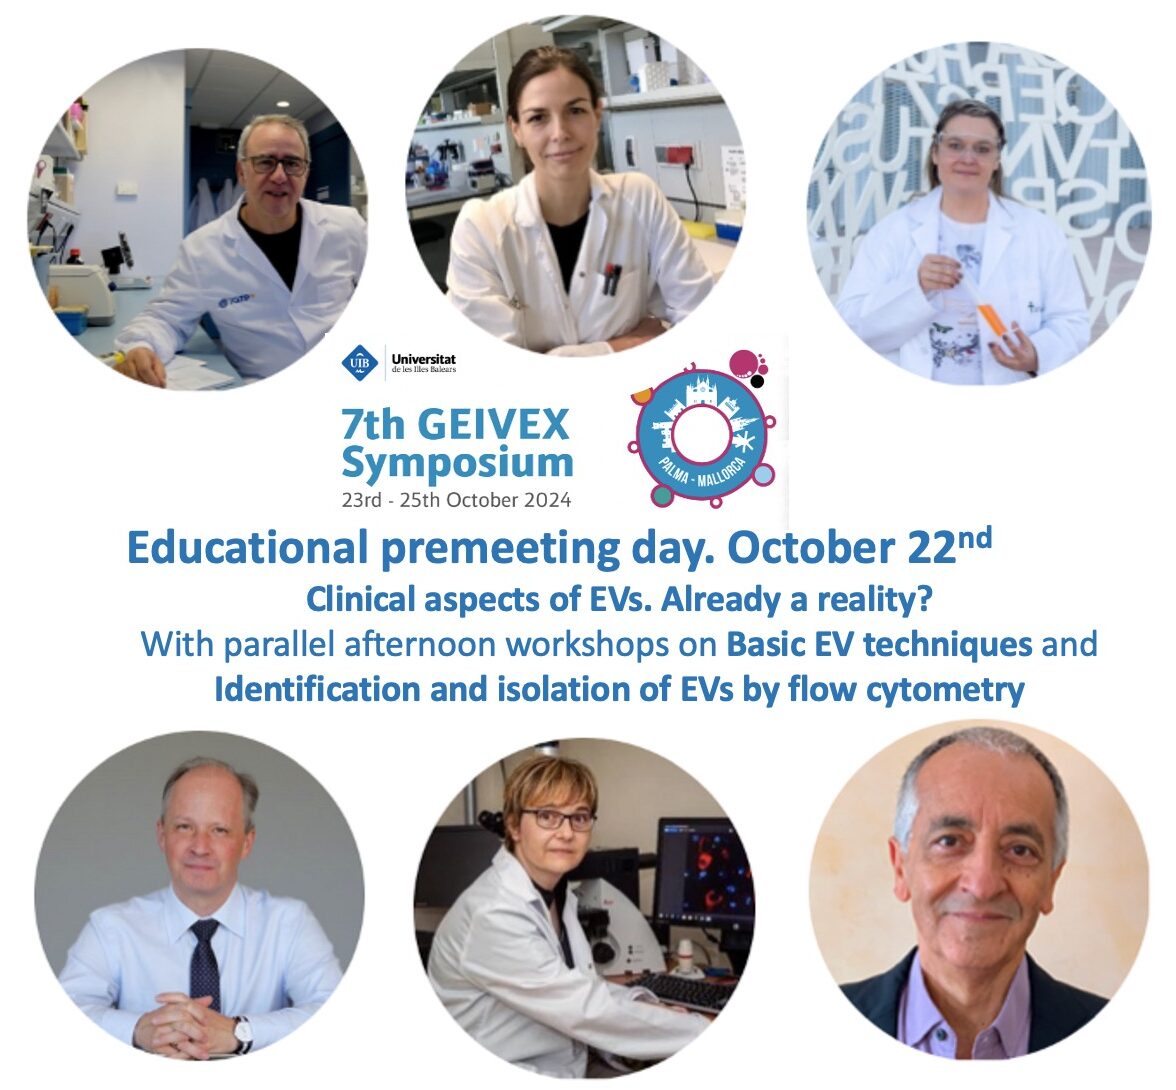 The preliminary program of our Educational Premeeting day is already online! - geivex.org/outreach/news/… - Check what we have prepared for October 22nd! And include the premeeting day in your registration! web 7th GEIVEX Symposium